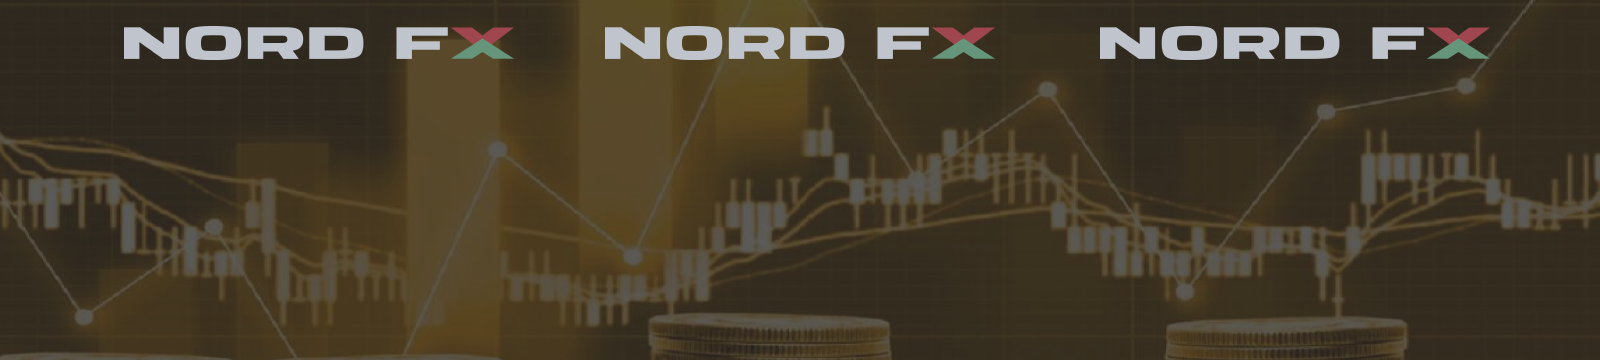 Forex and Cryptocurrency Forecast for August 30 - September 03, 2021